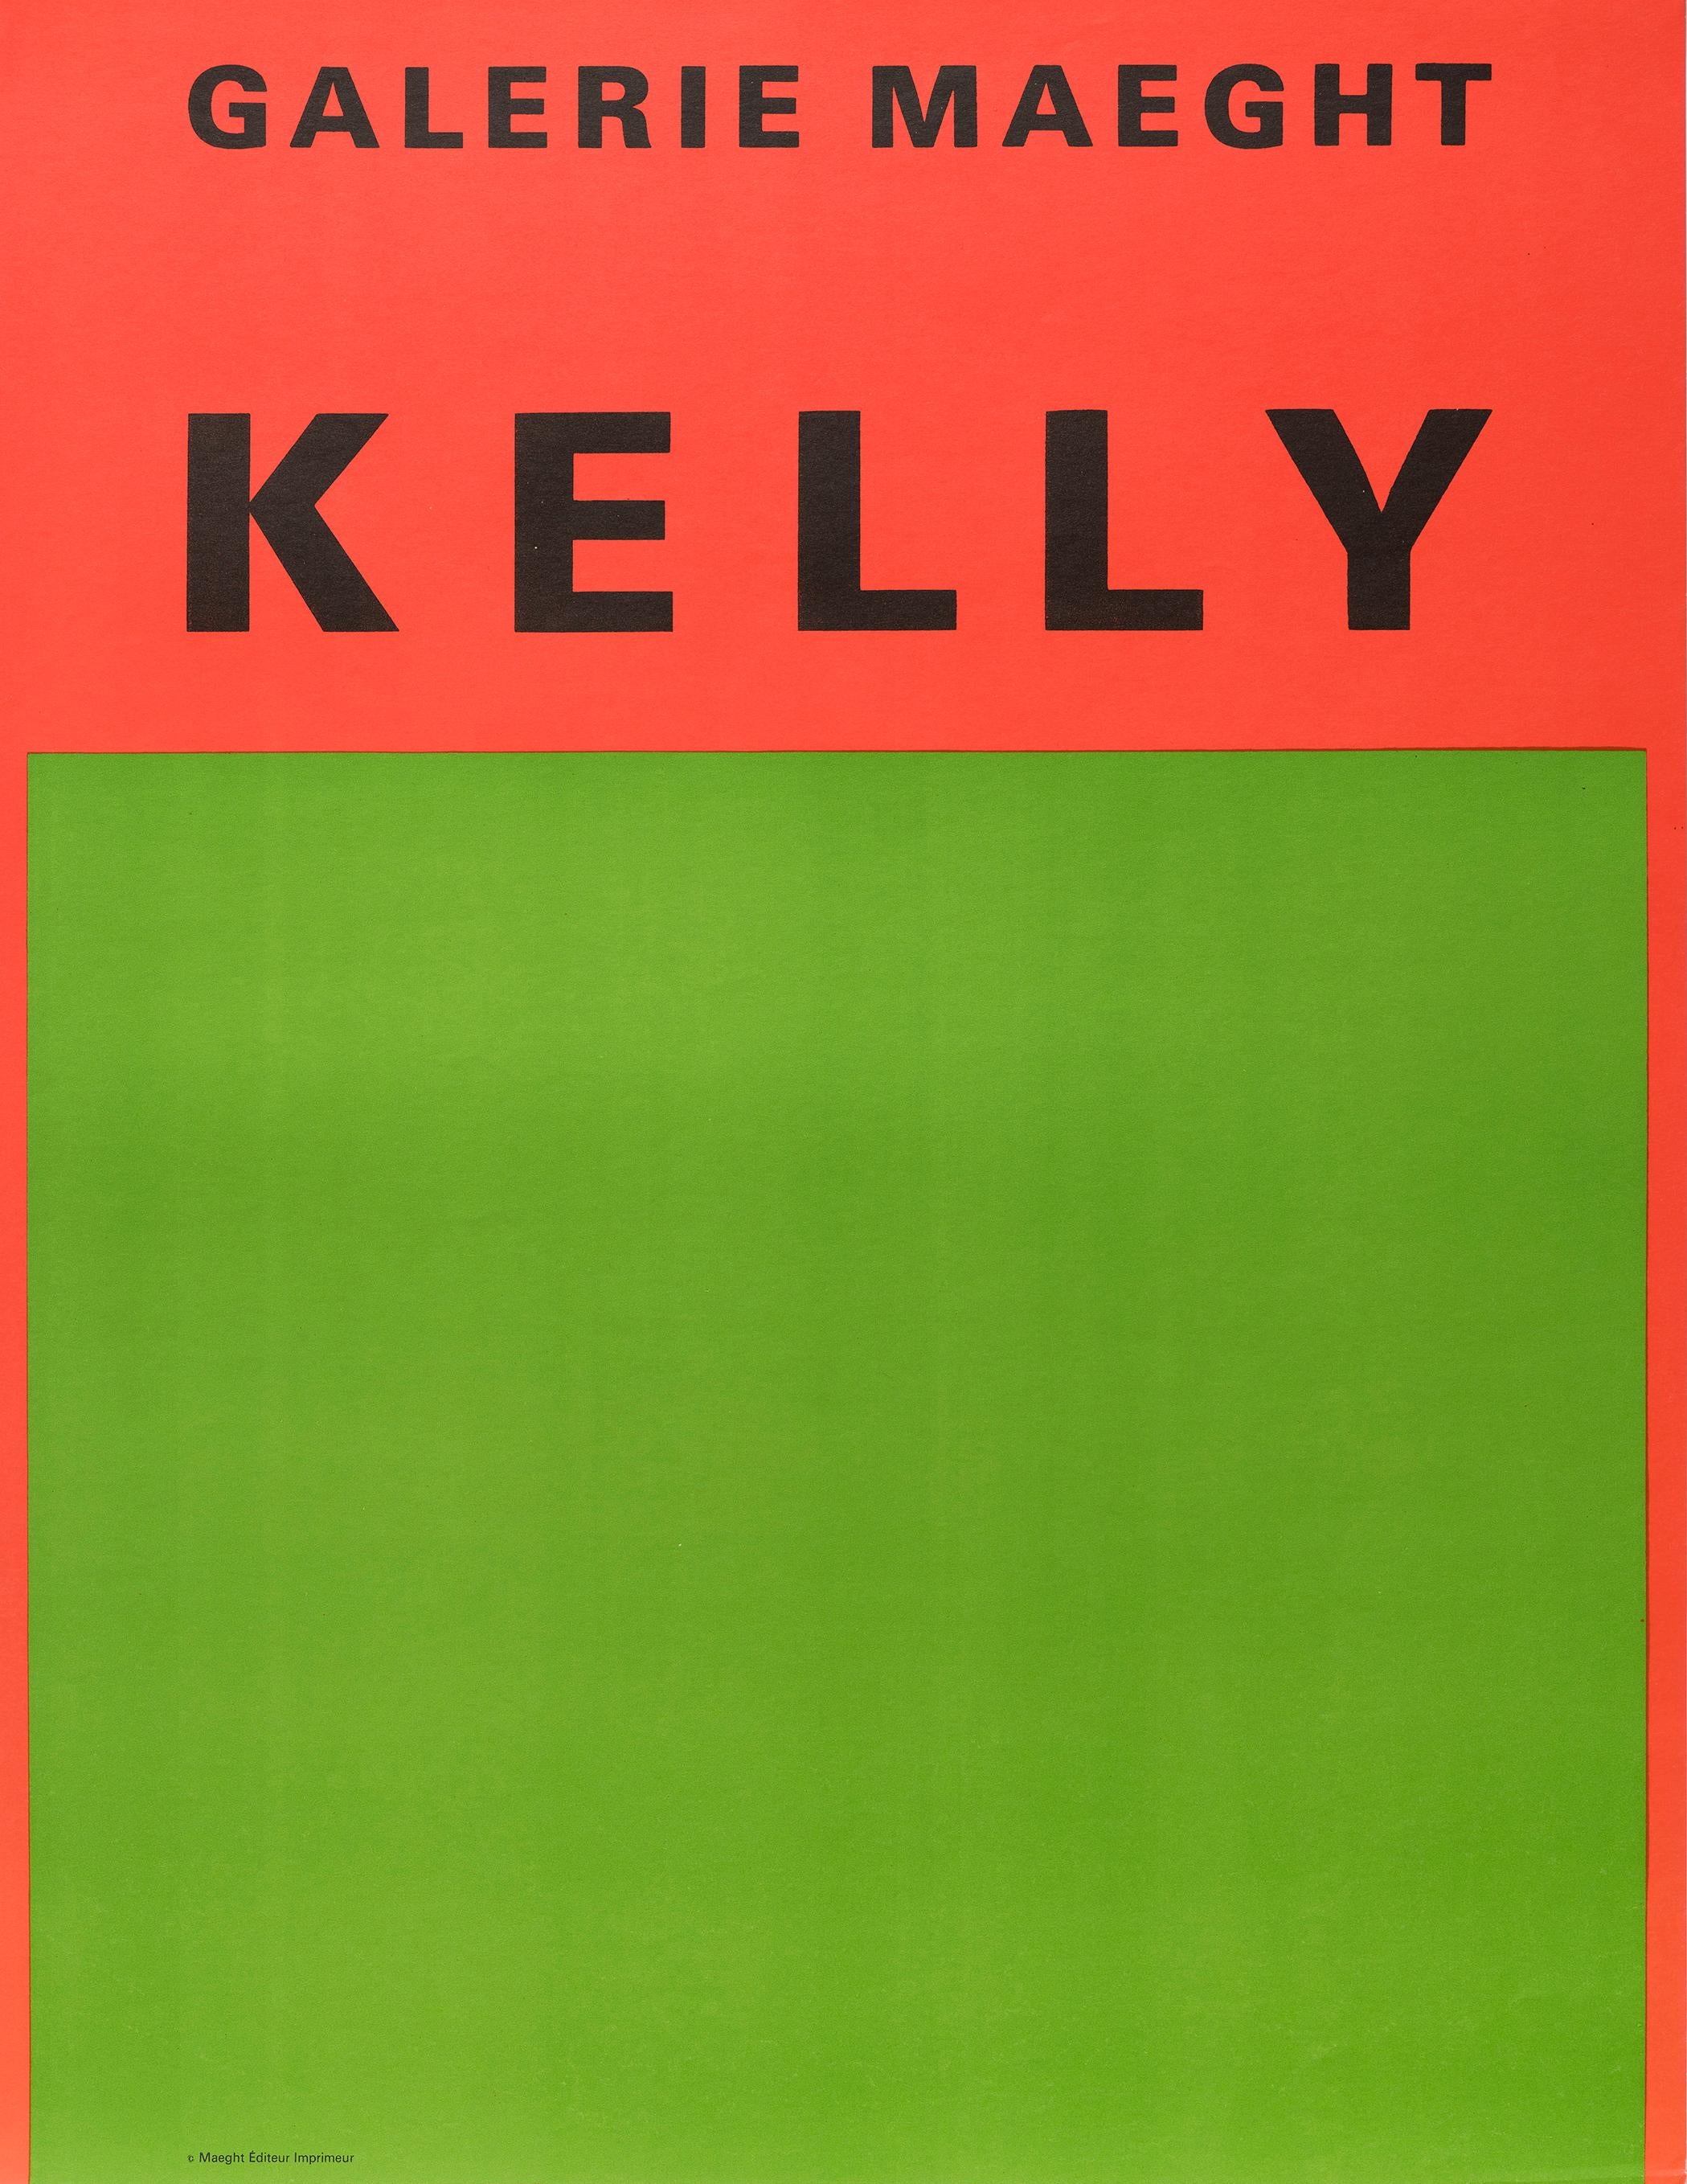 Kelly, Galerie Maeght (Red over Green) - Print by Ellsworth Kelly